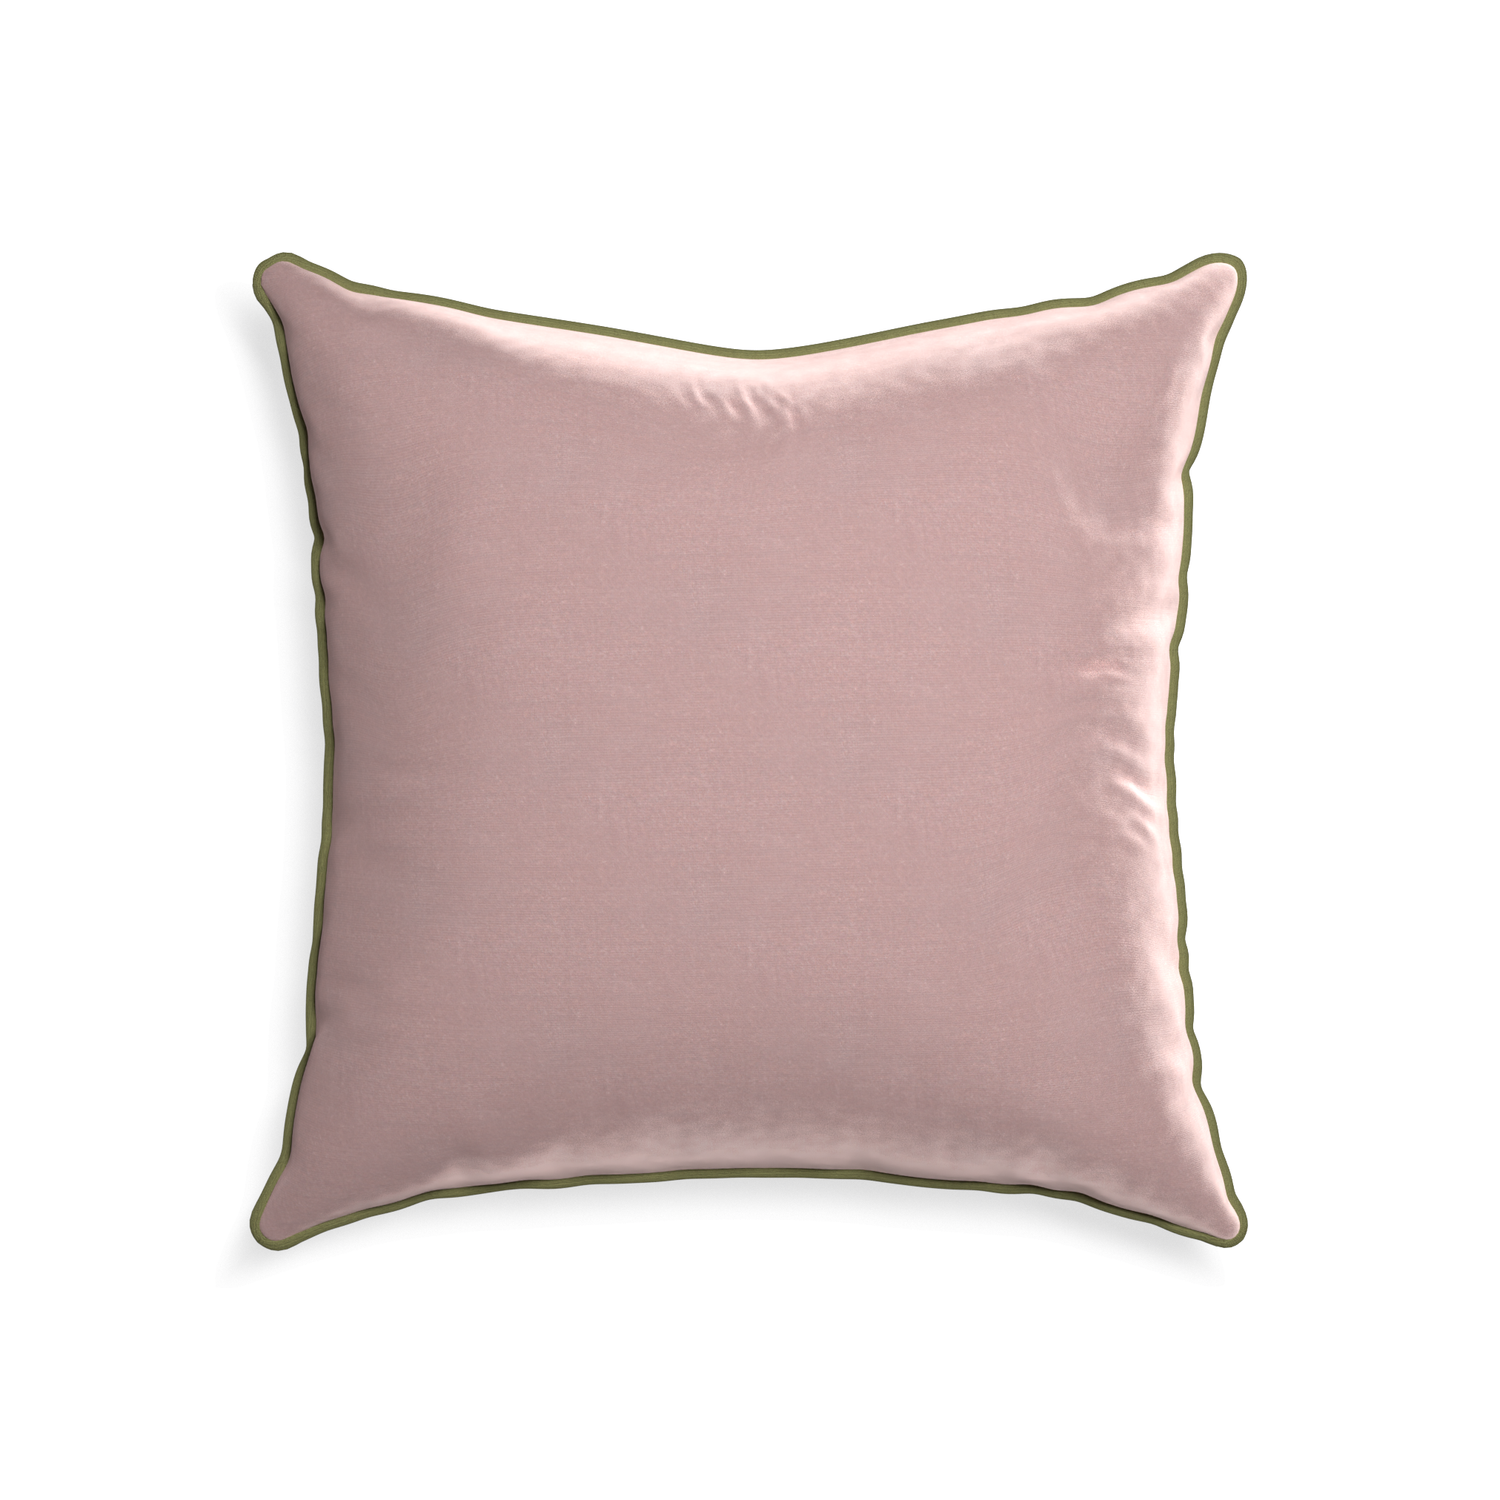 22-square mauve velvet custom pillow with f piping on white background